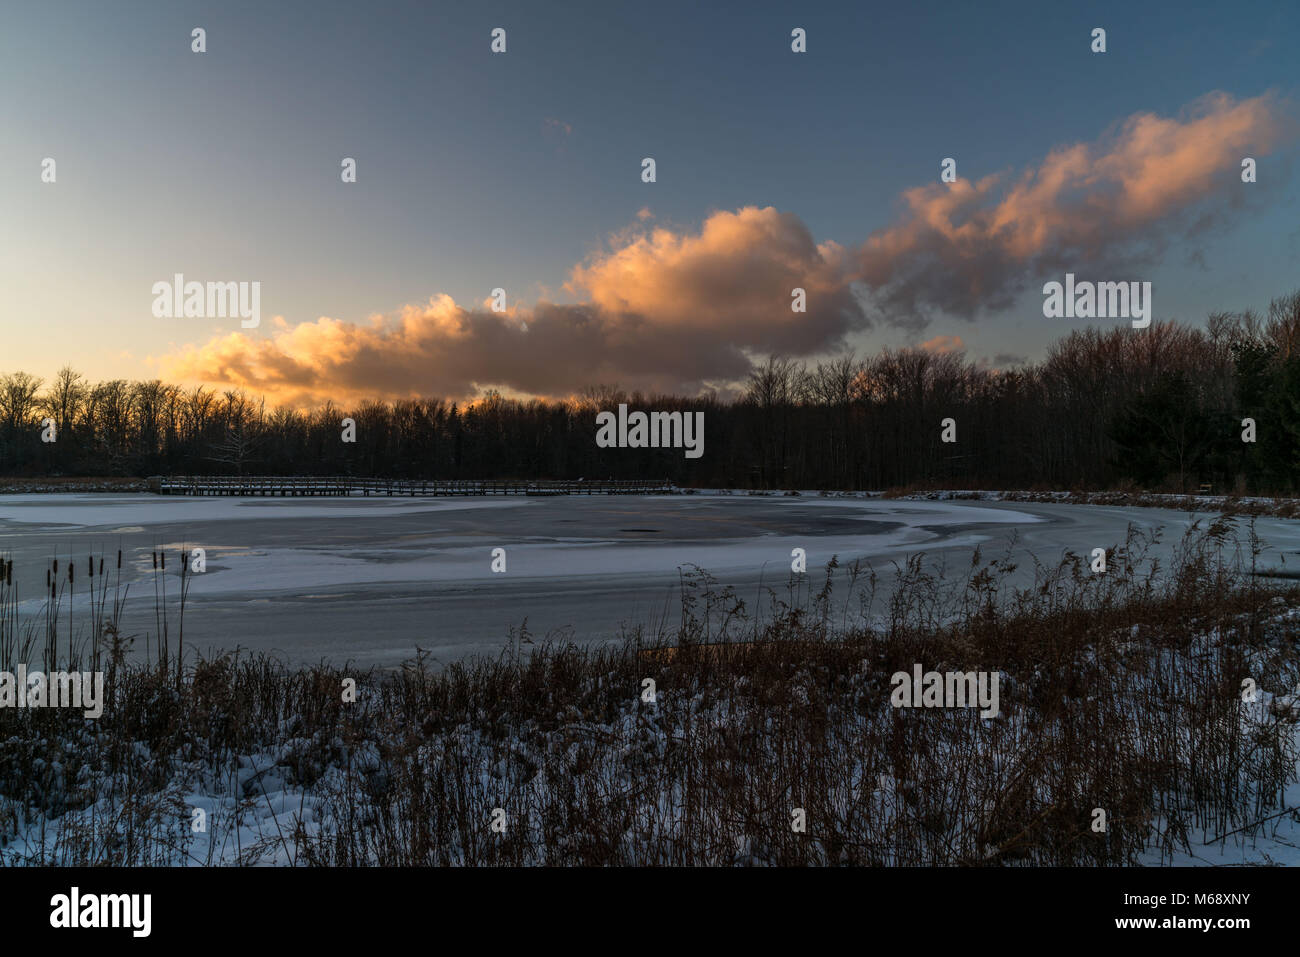 A walk through the park on a frigid winter day in northeast Ohio at sunset. Stock Photo